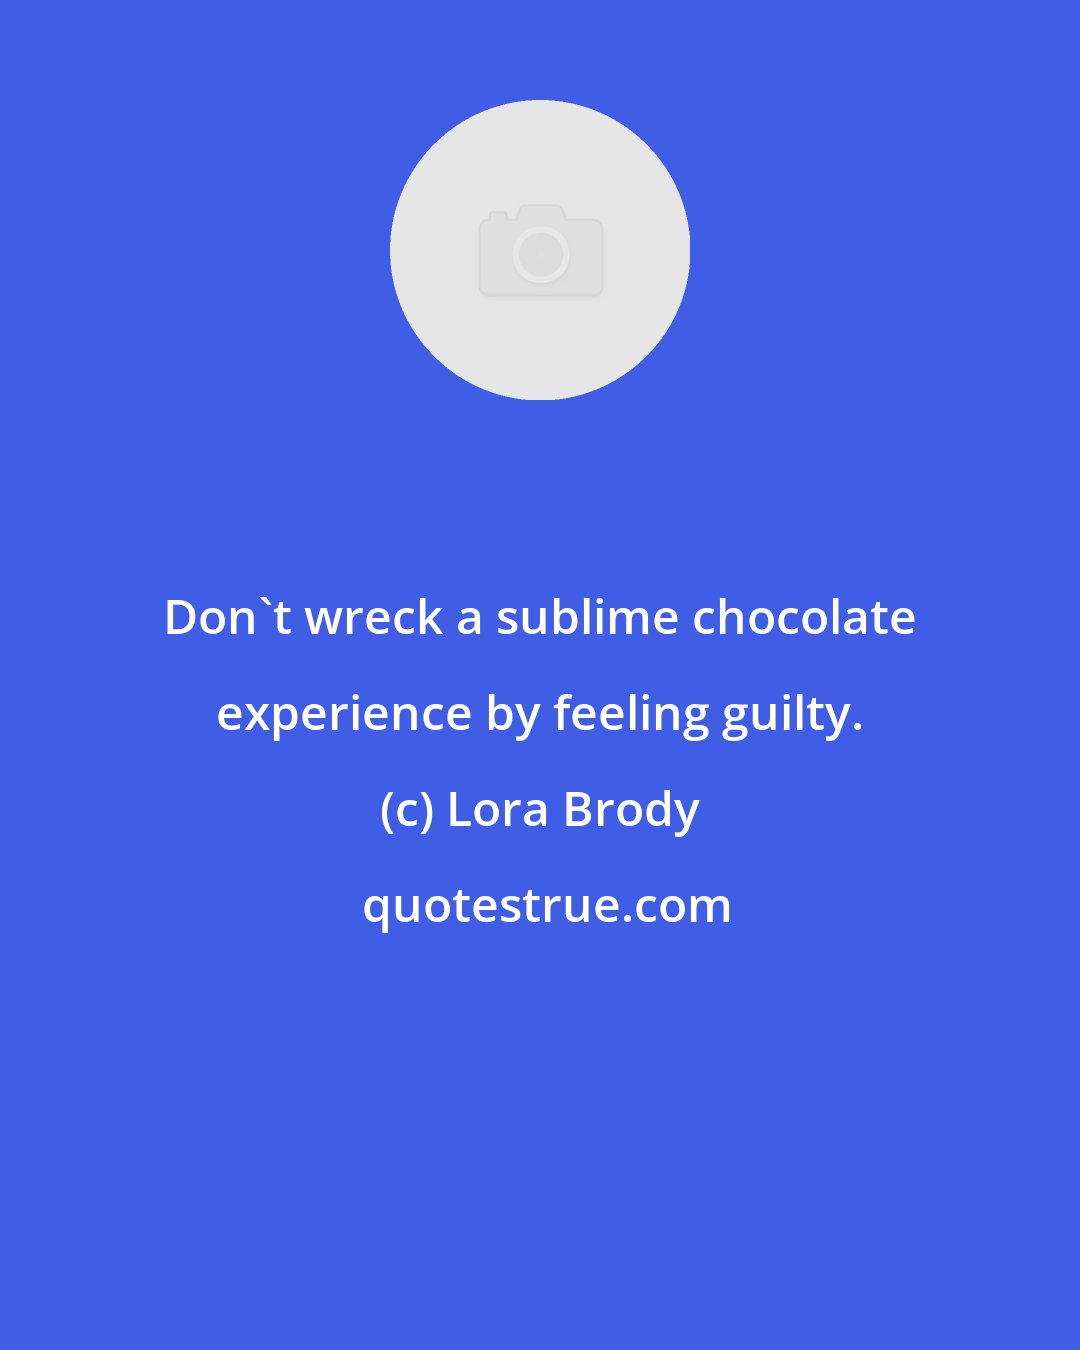 Lora Brody: Don't wreck a sublime chocolate experience by feeling guilty.